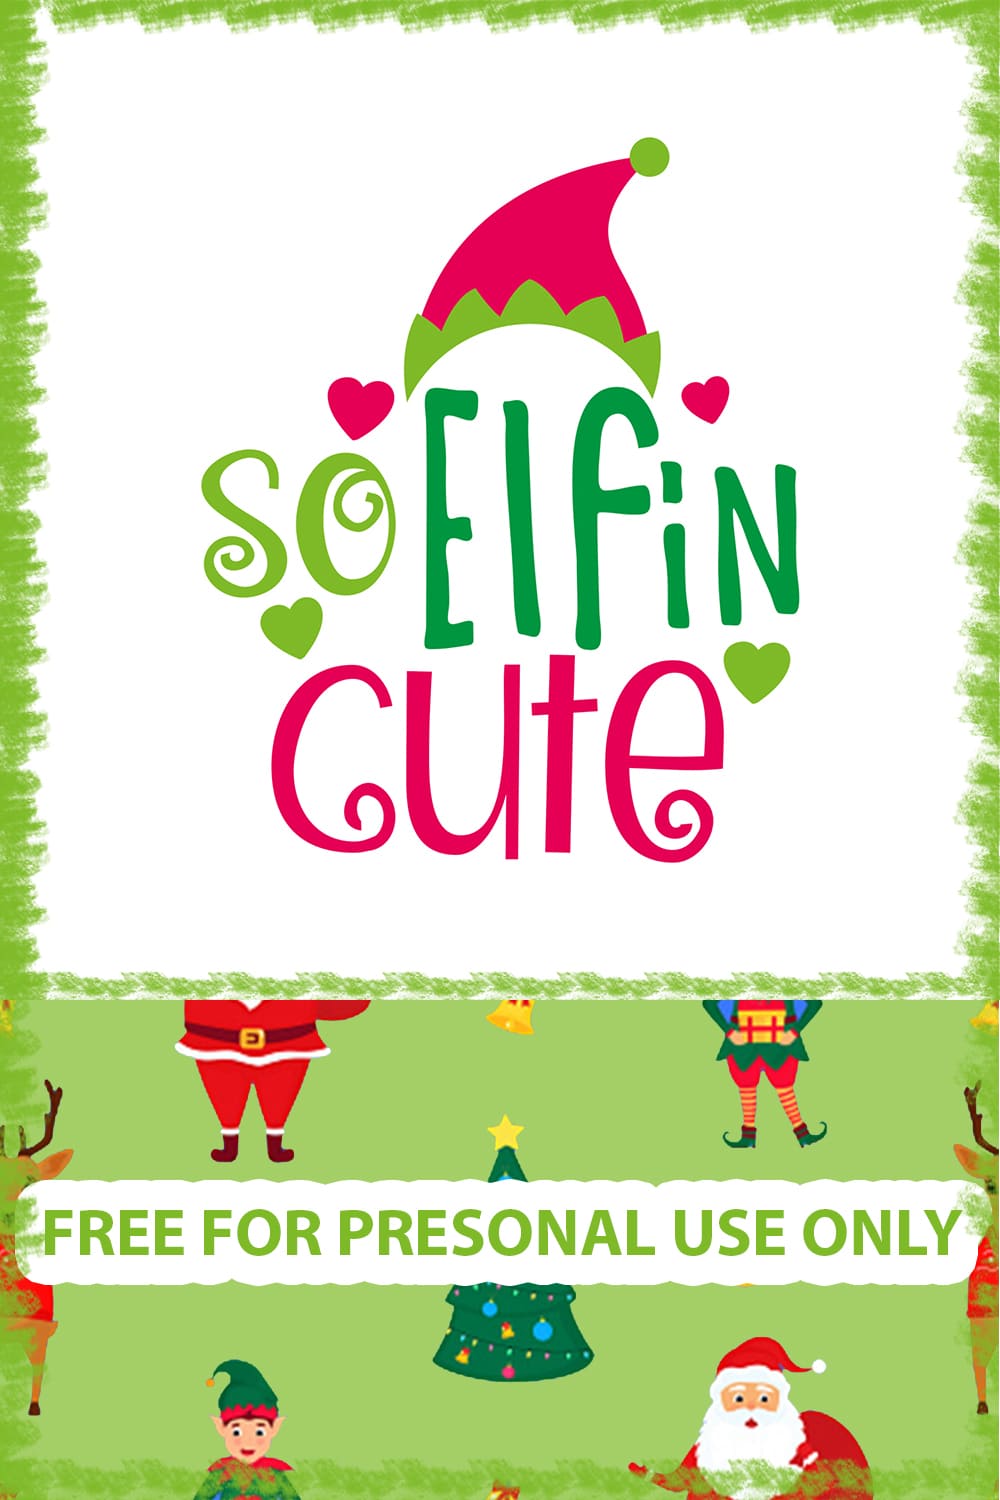 Quote so elfin cute free svg files pinterest collage image.